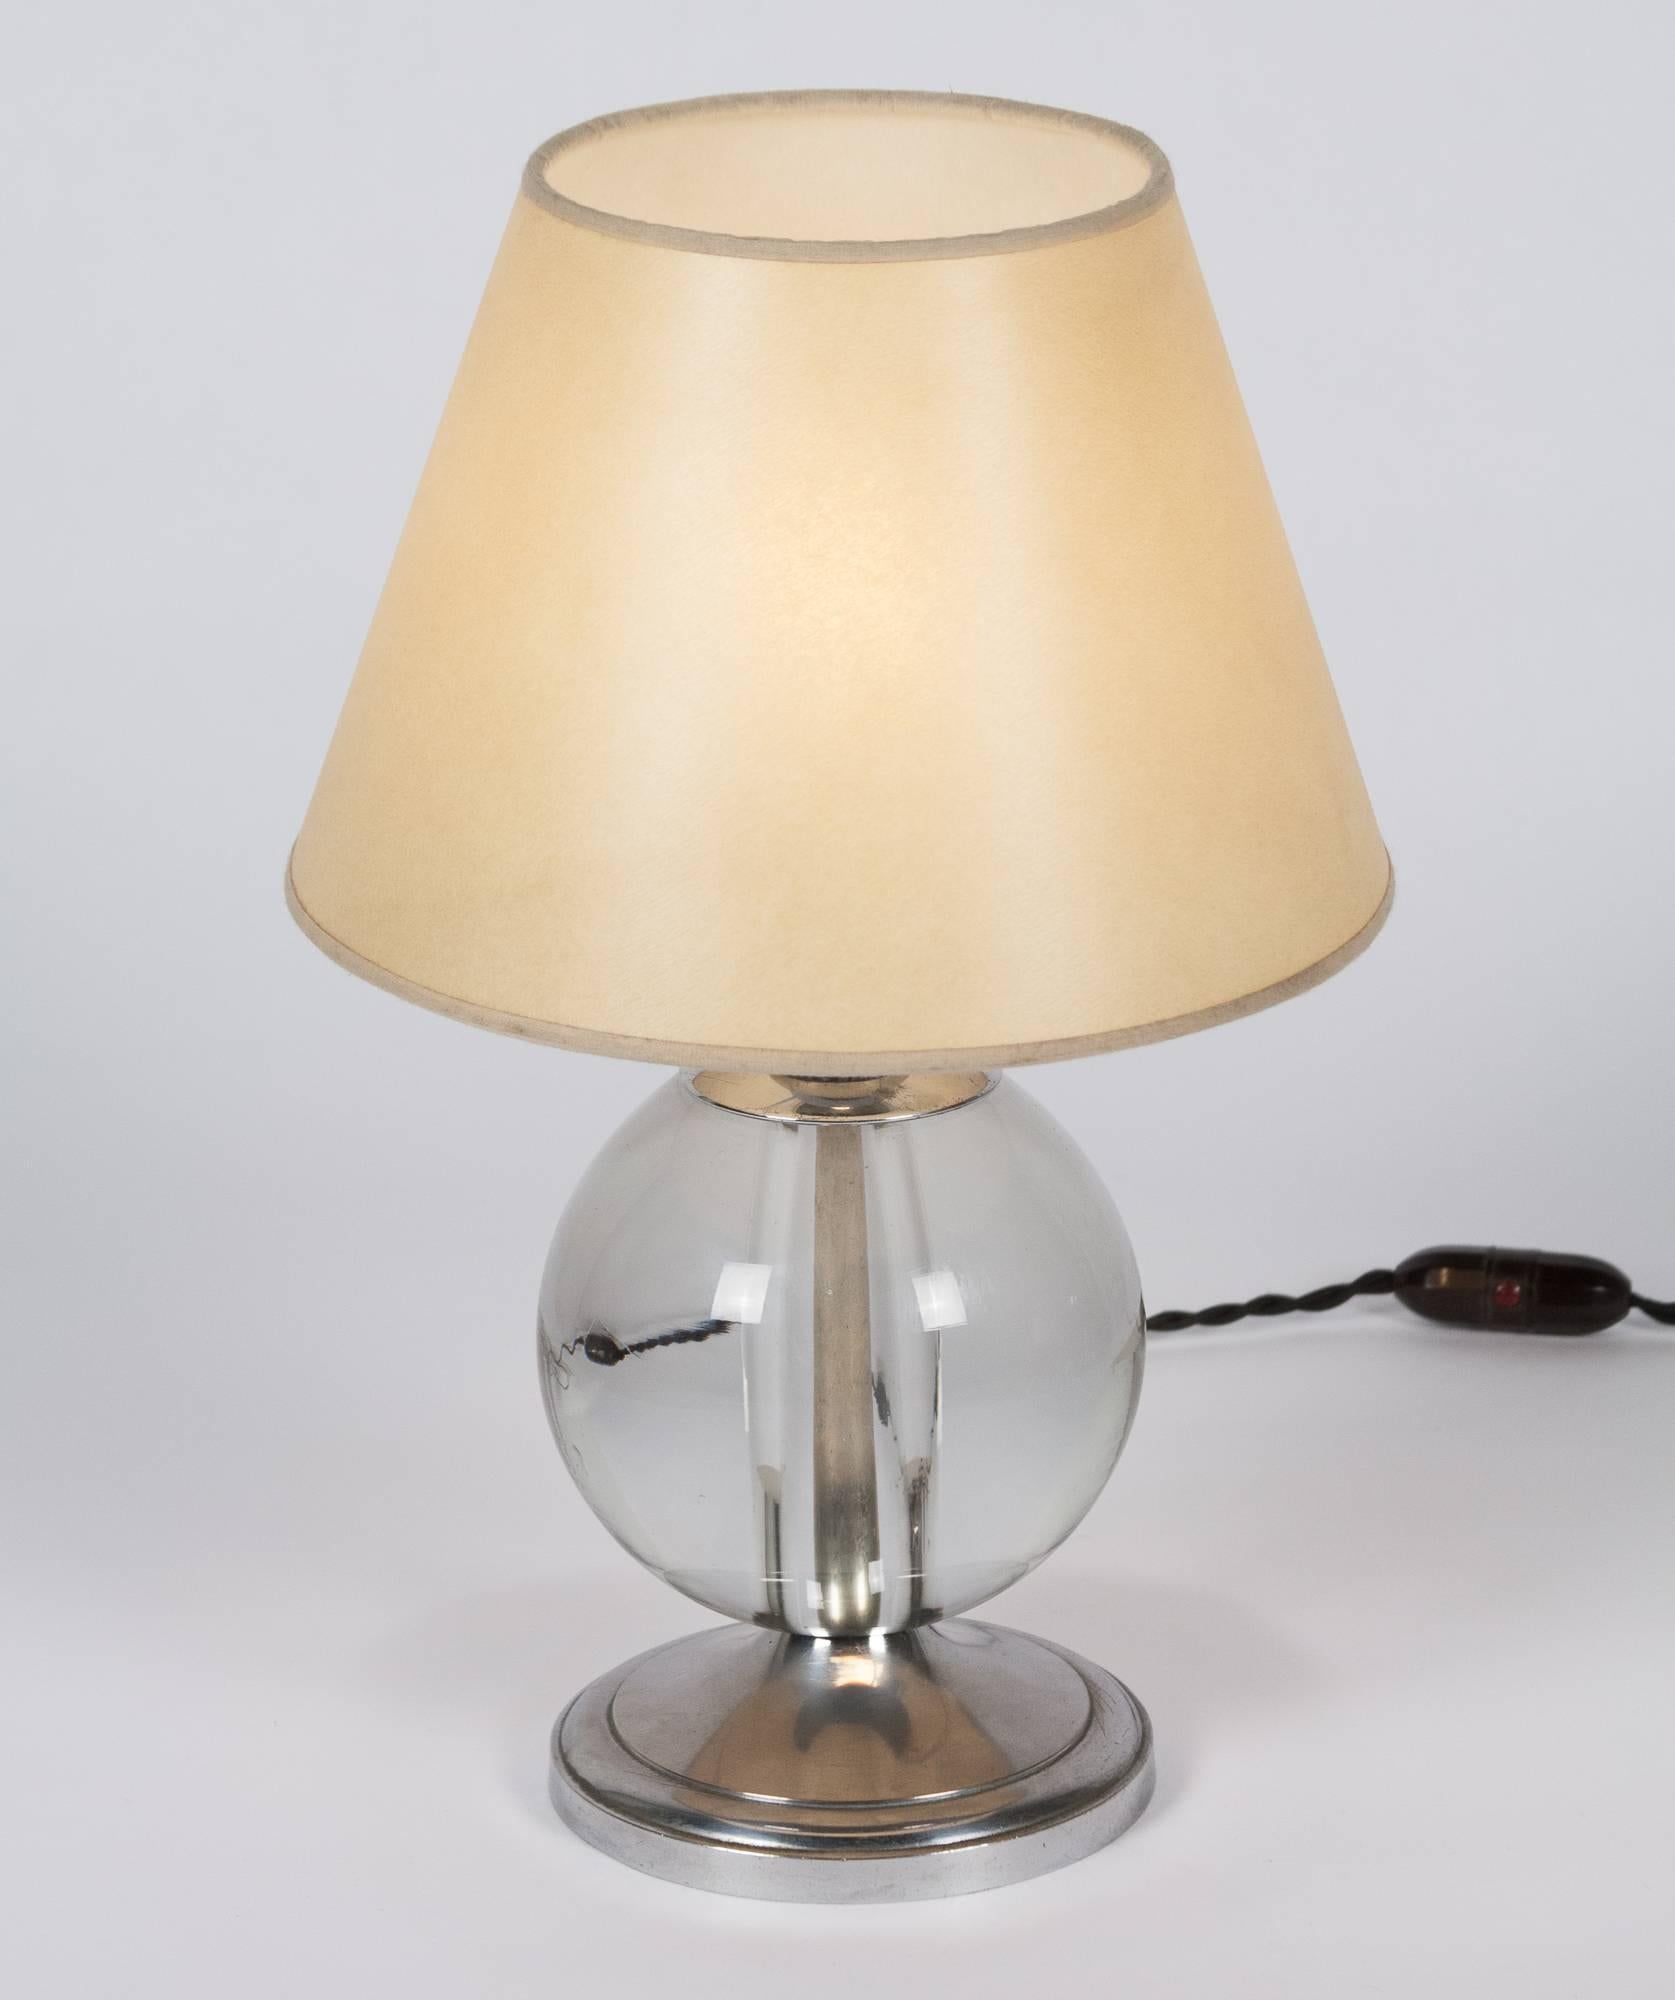 Jacques Adnet Attributed Crystal Lamp, French, 1930s For Sale 1